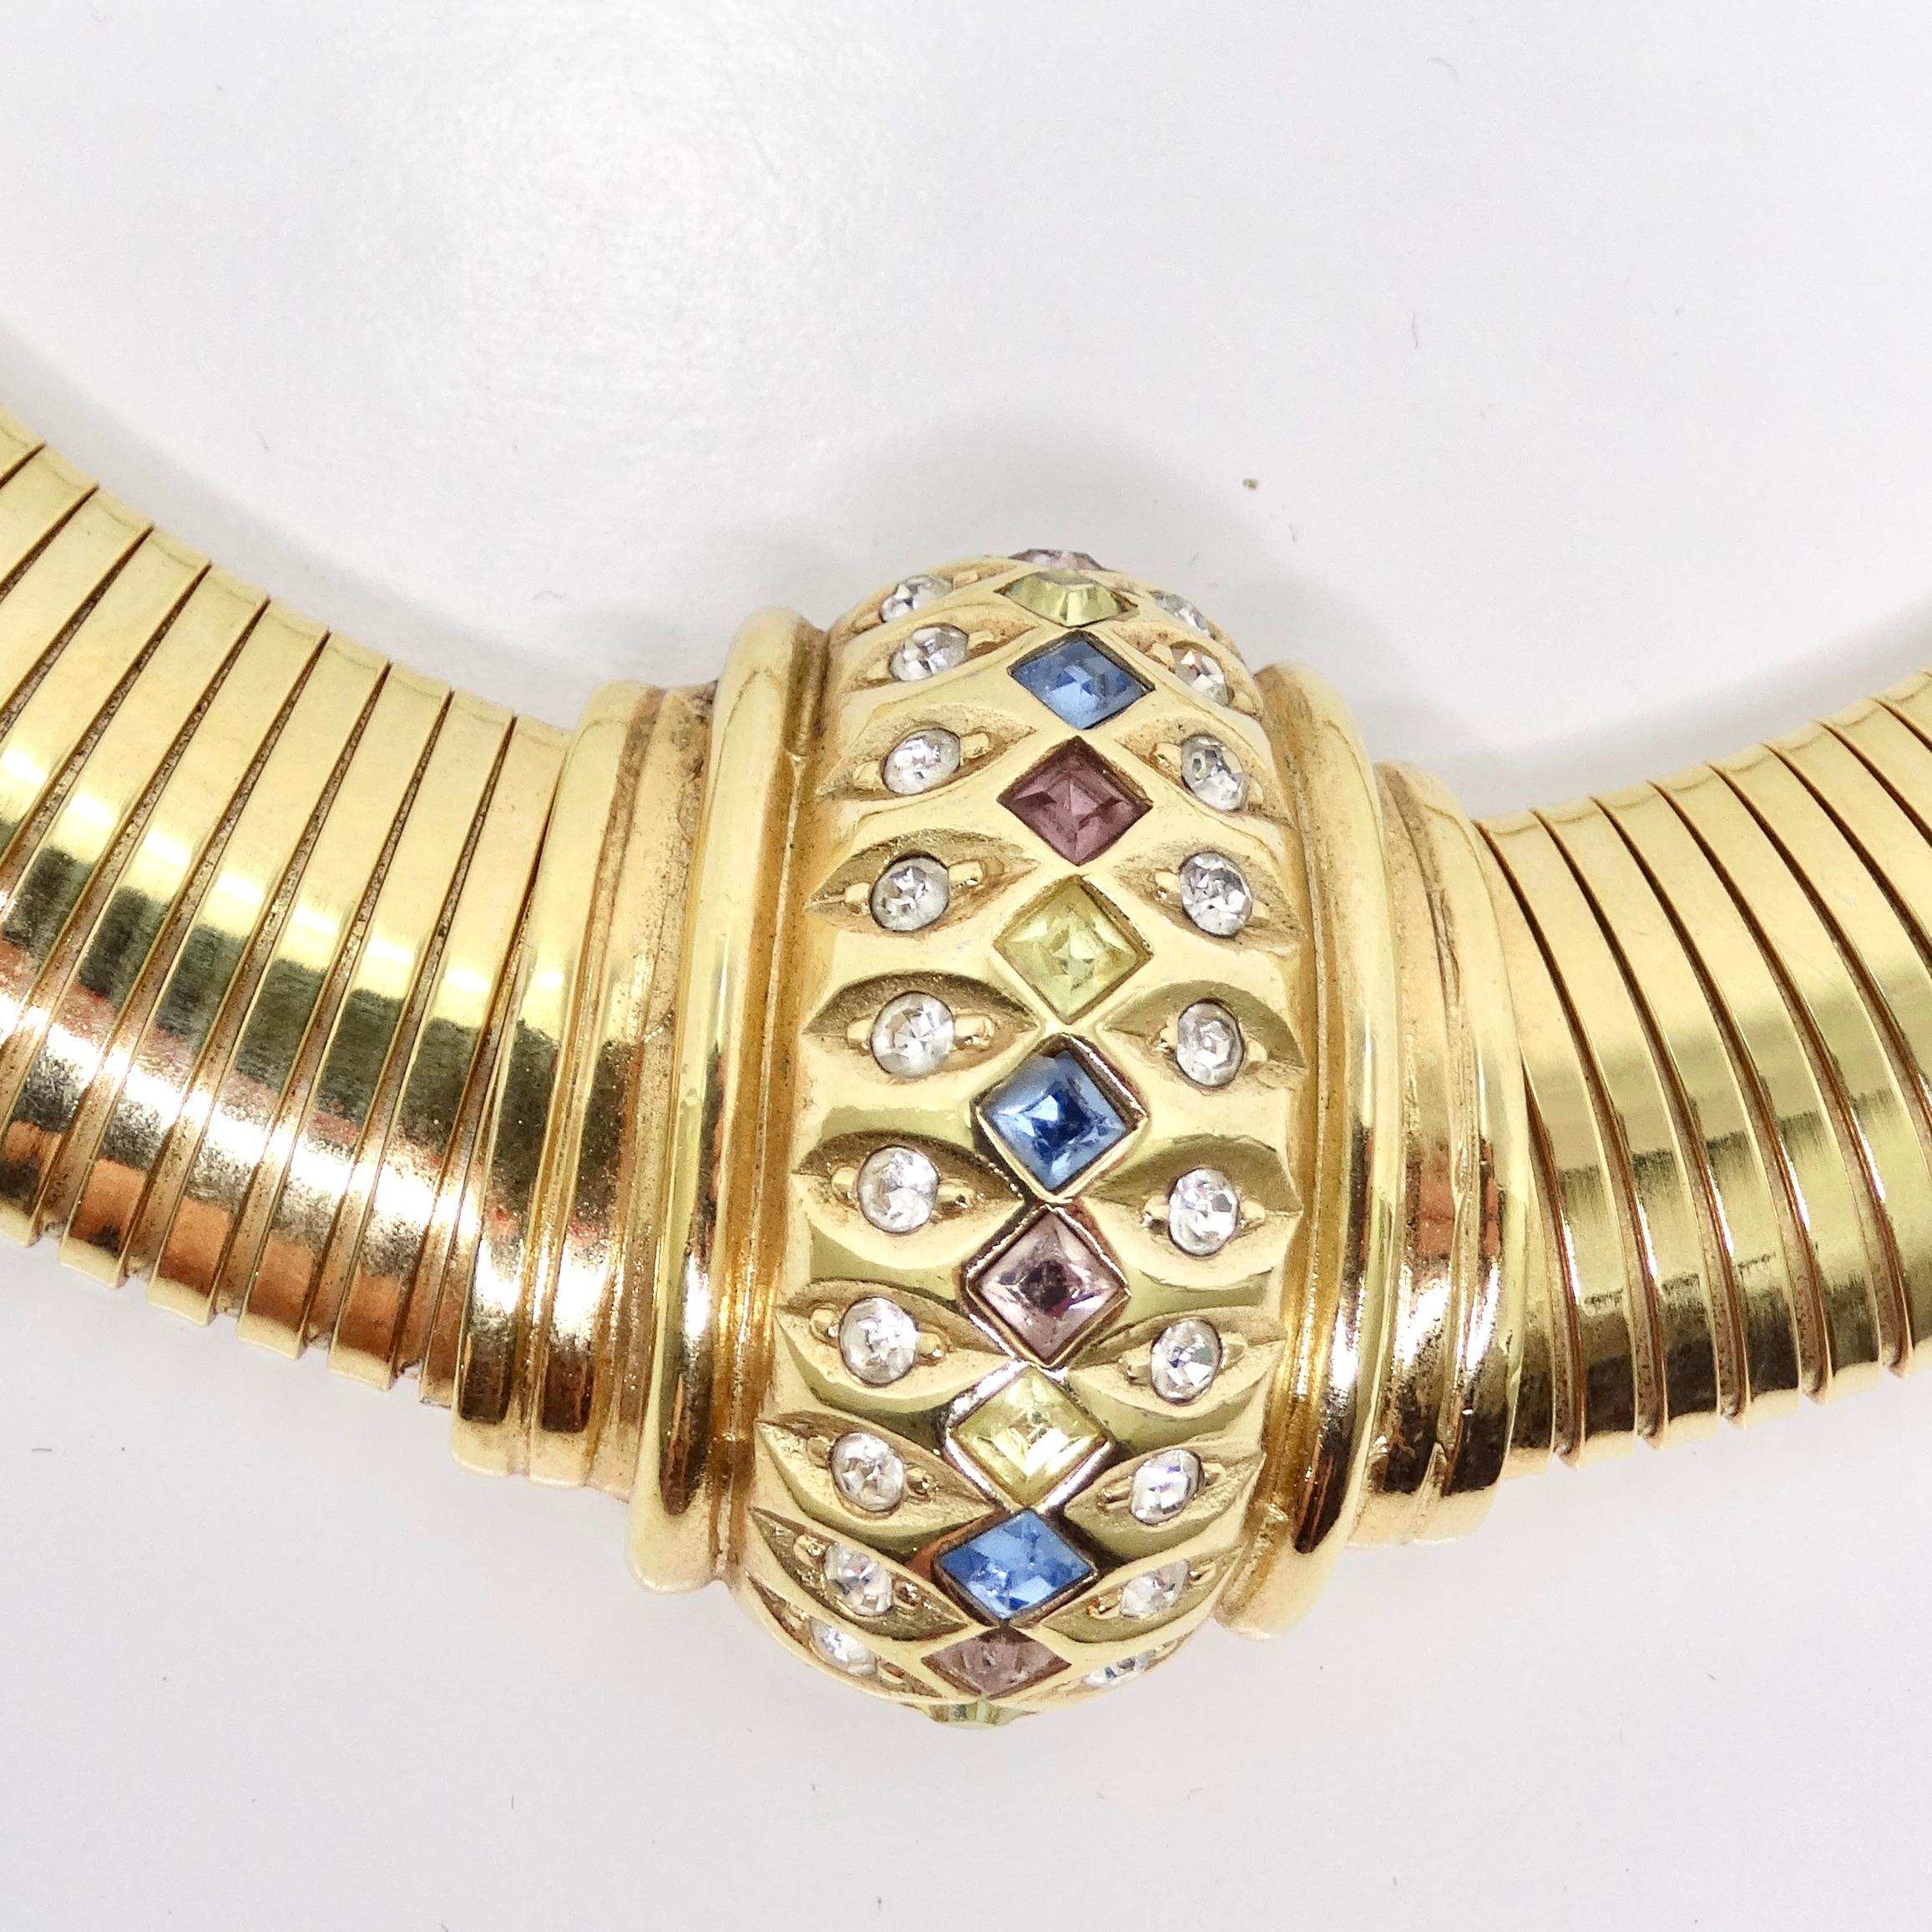 Introducing the Christian Dior 1980s Gold Tone Omega Rhinestone Choker, a stunning piece that encapsulates the glamour and elegance of the 1980s. Crafted with exquisite attention to detail, this omega style gold tone choker features a flat and